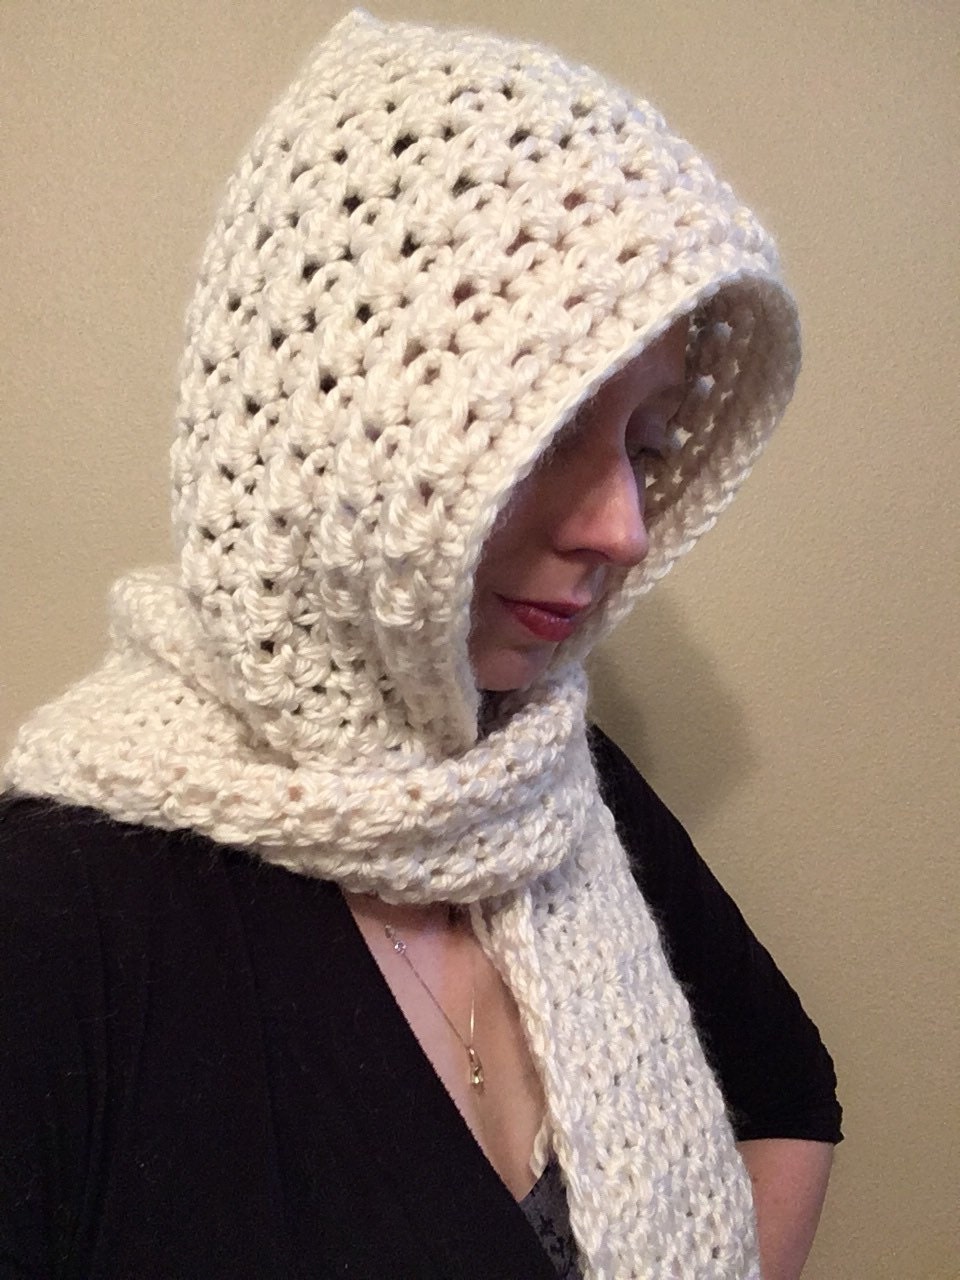 Adult Sized Crocheted Hooded Scarf with pockets and fringe